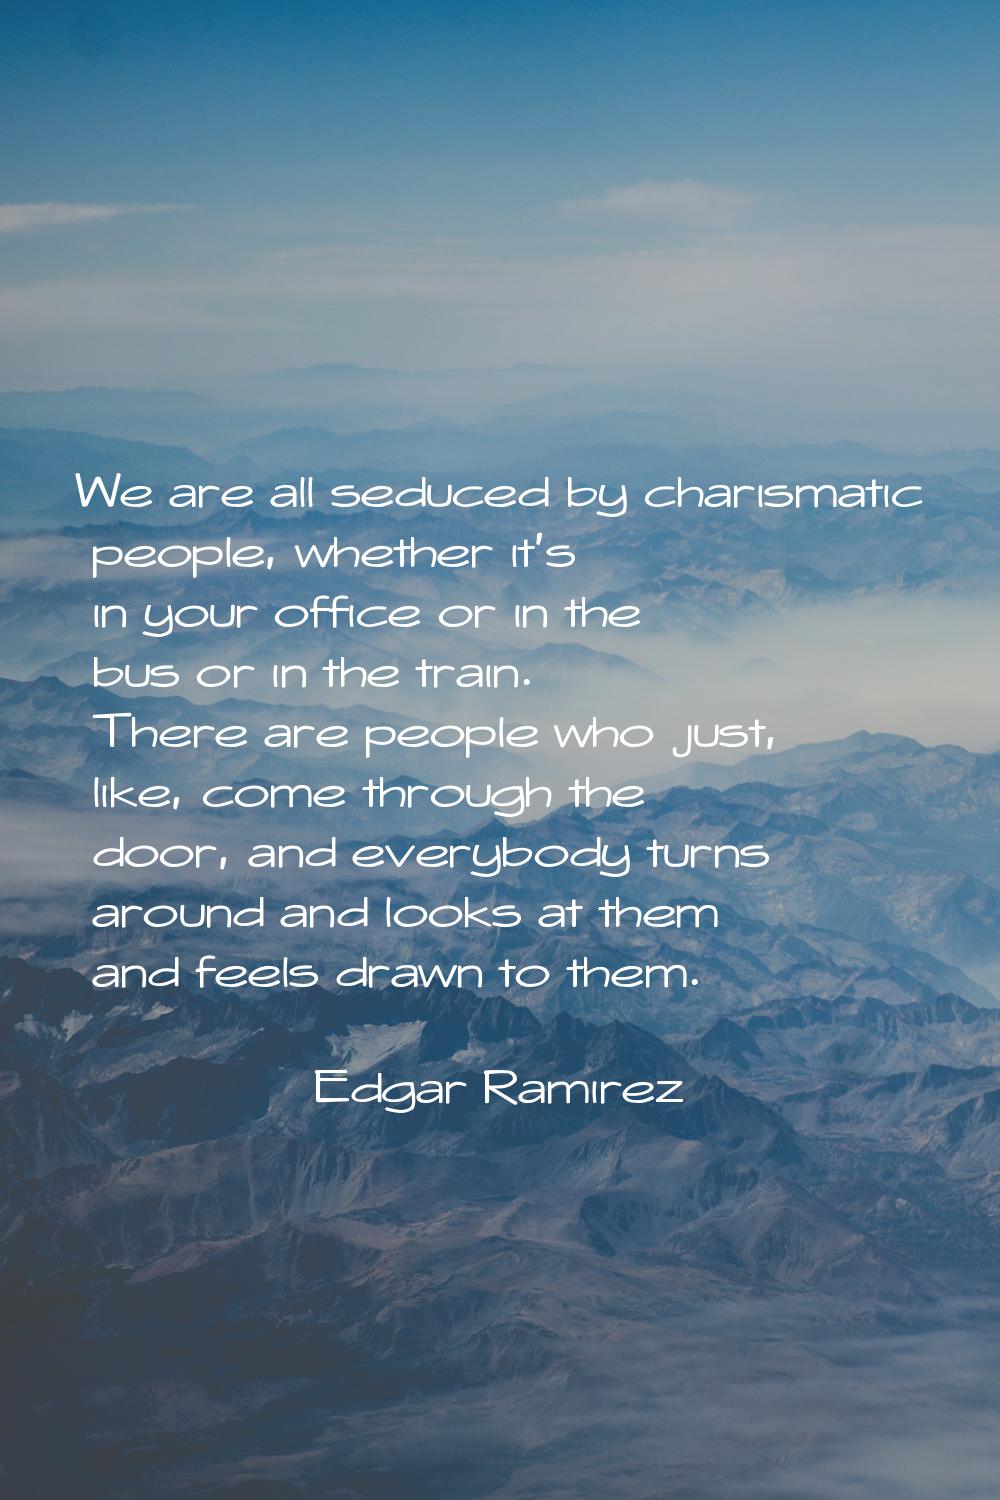 We are all seduced by charismatic people, whether it's in your office or in the bus or in the train